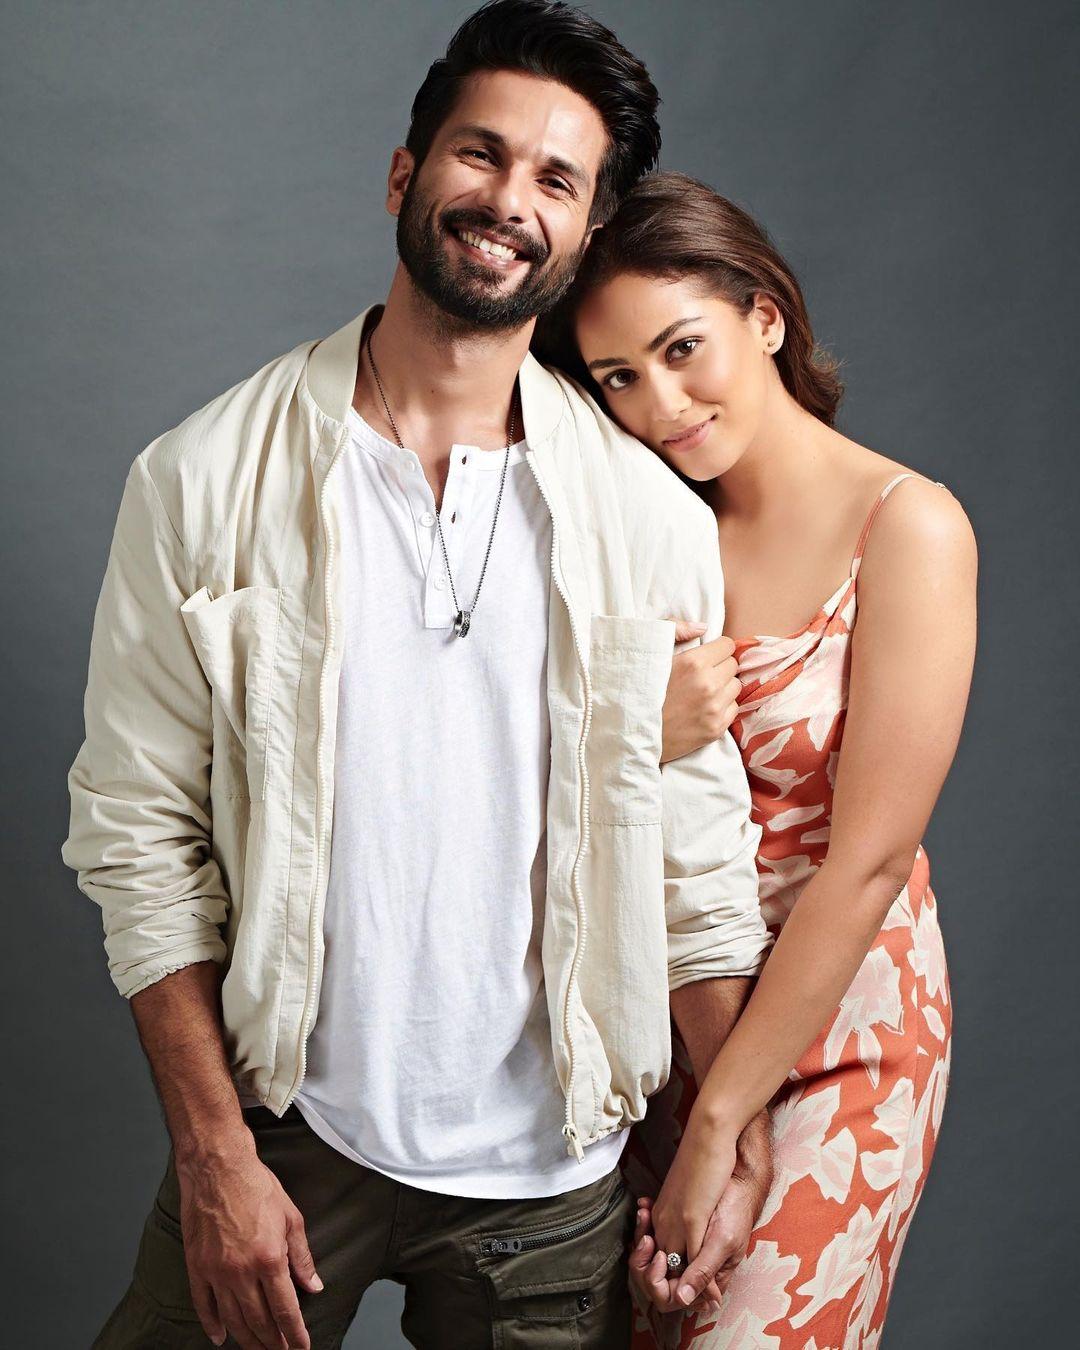 Feel like going on a lunch date and want something refreshing to wear? This floral dress on Mira and Shahid's simple yet dashing look is a must-have